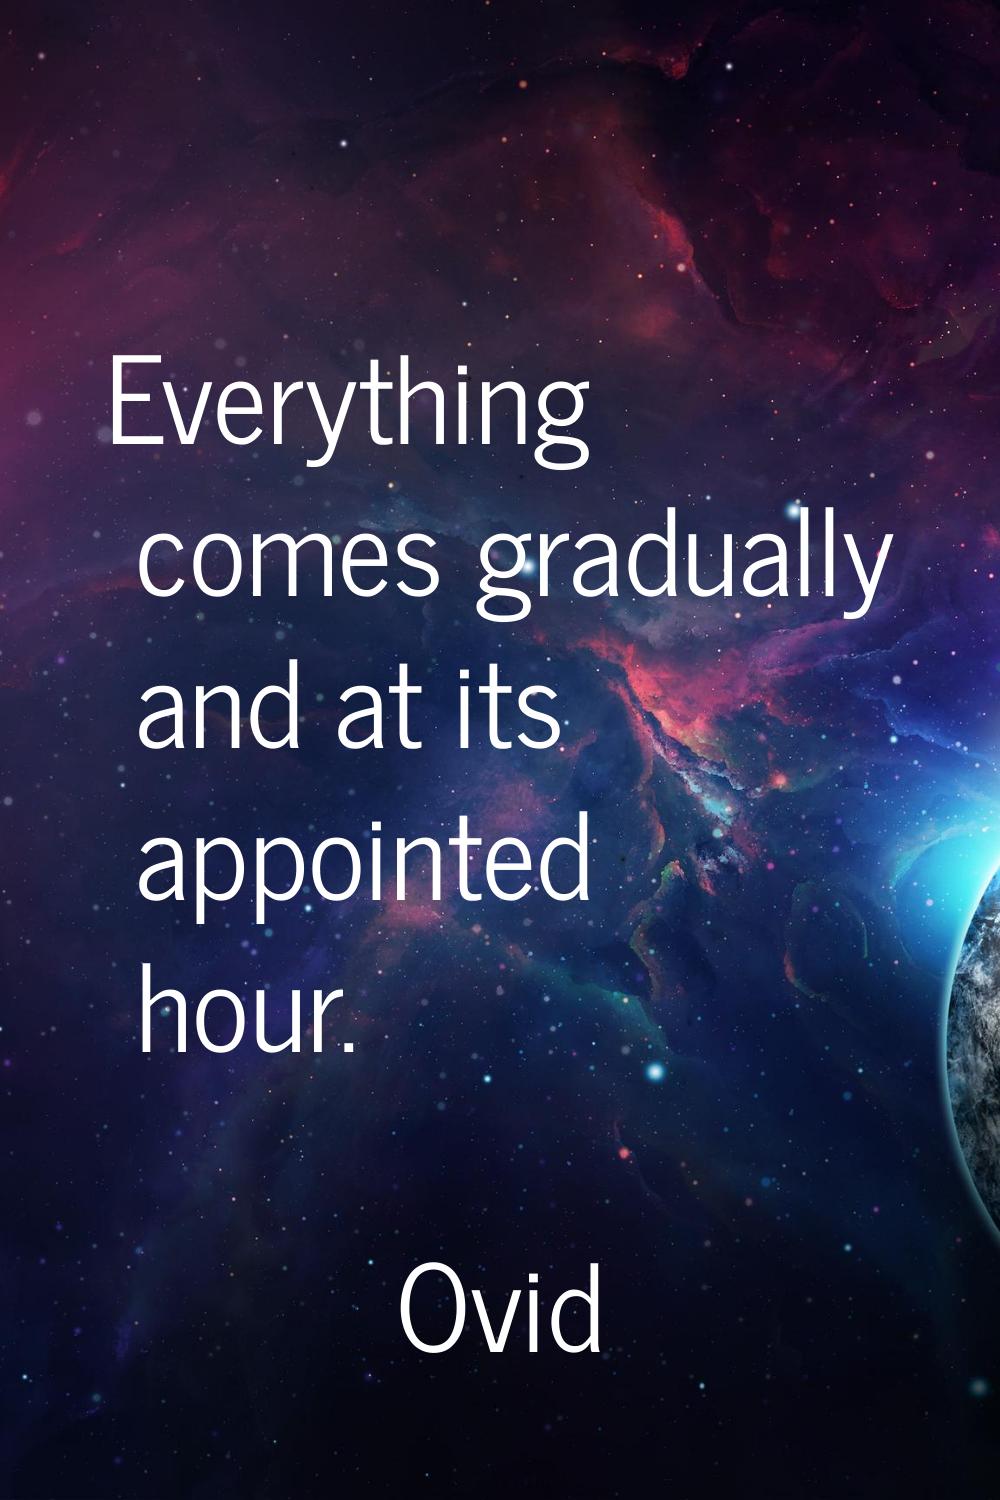 Everything comes gradually and at its appointed hour.